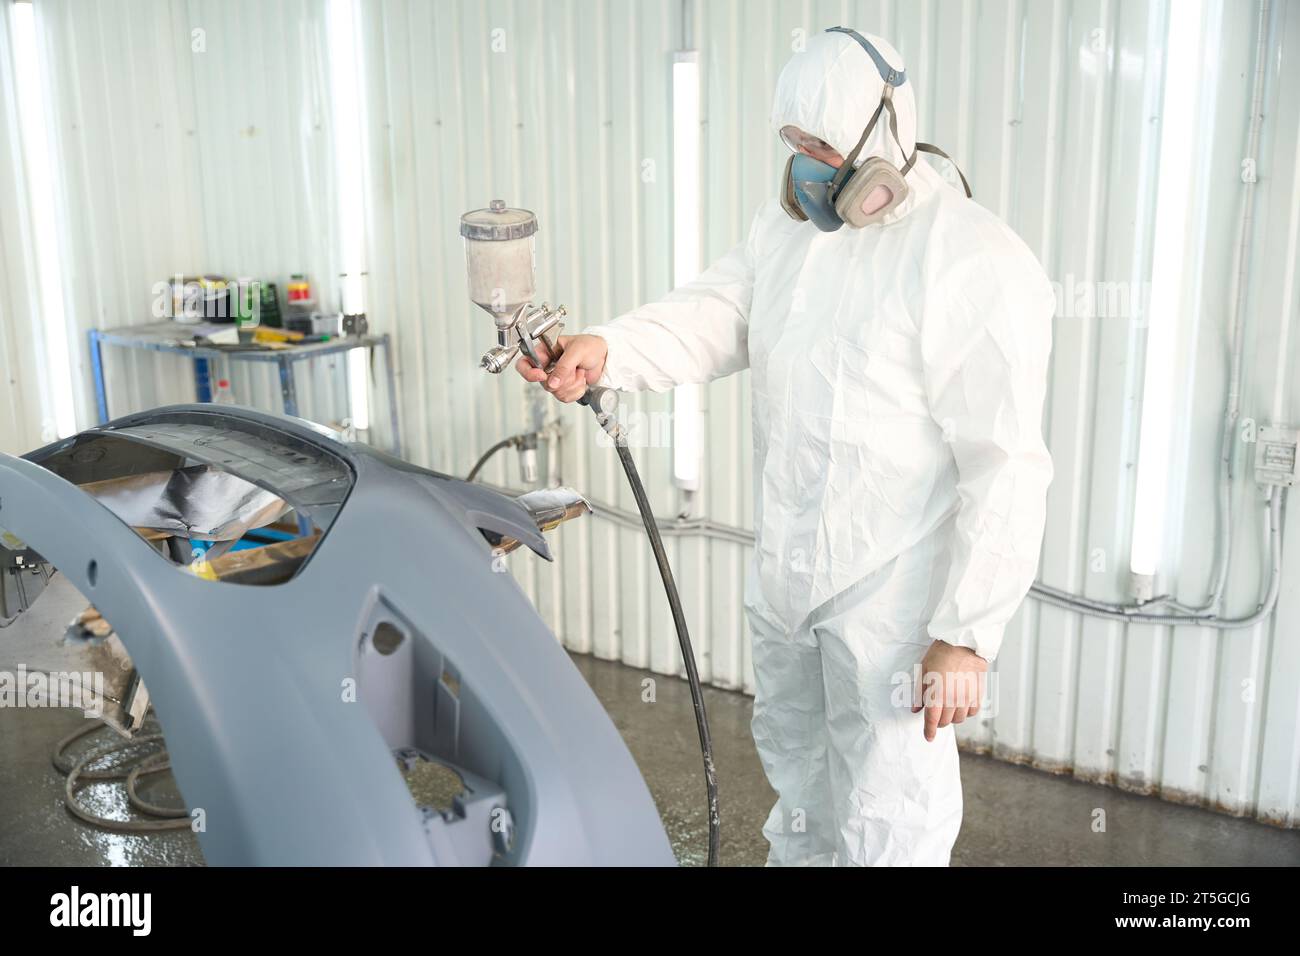 Car detailing worker spray-painting auto body panel in repair shop Stock Photo